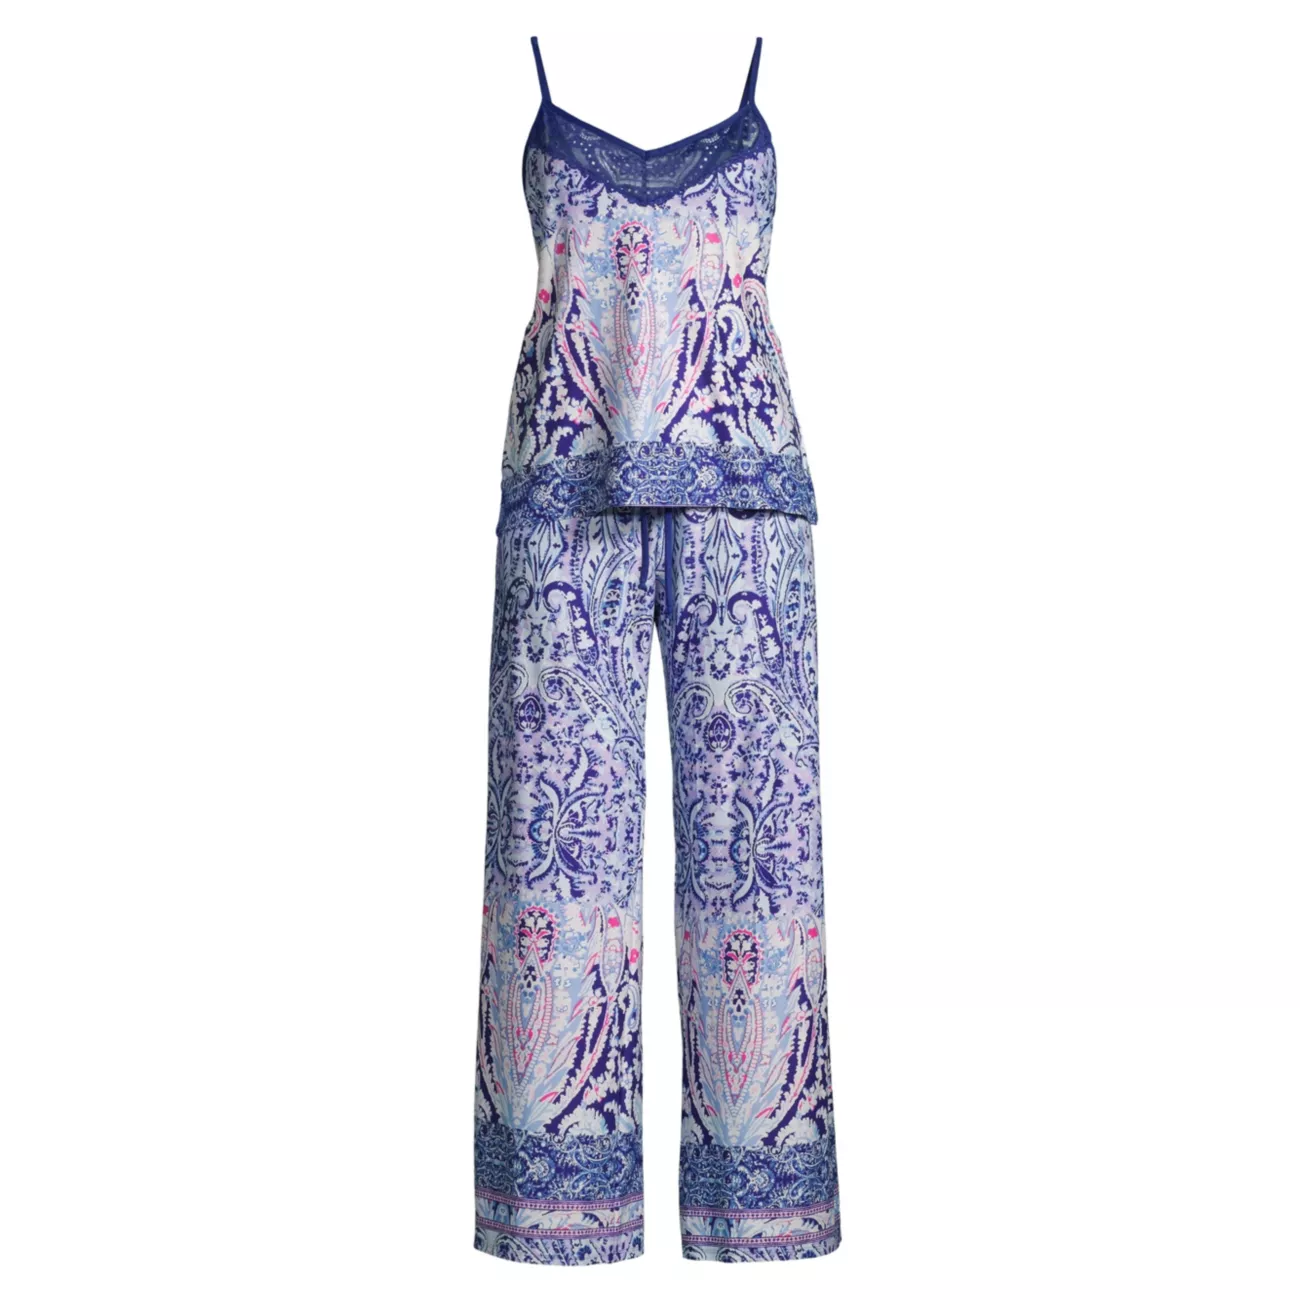 Nora Paisley Cami Pajamas In Bloom by Jonquil